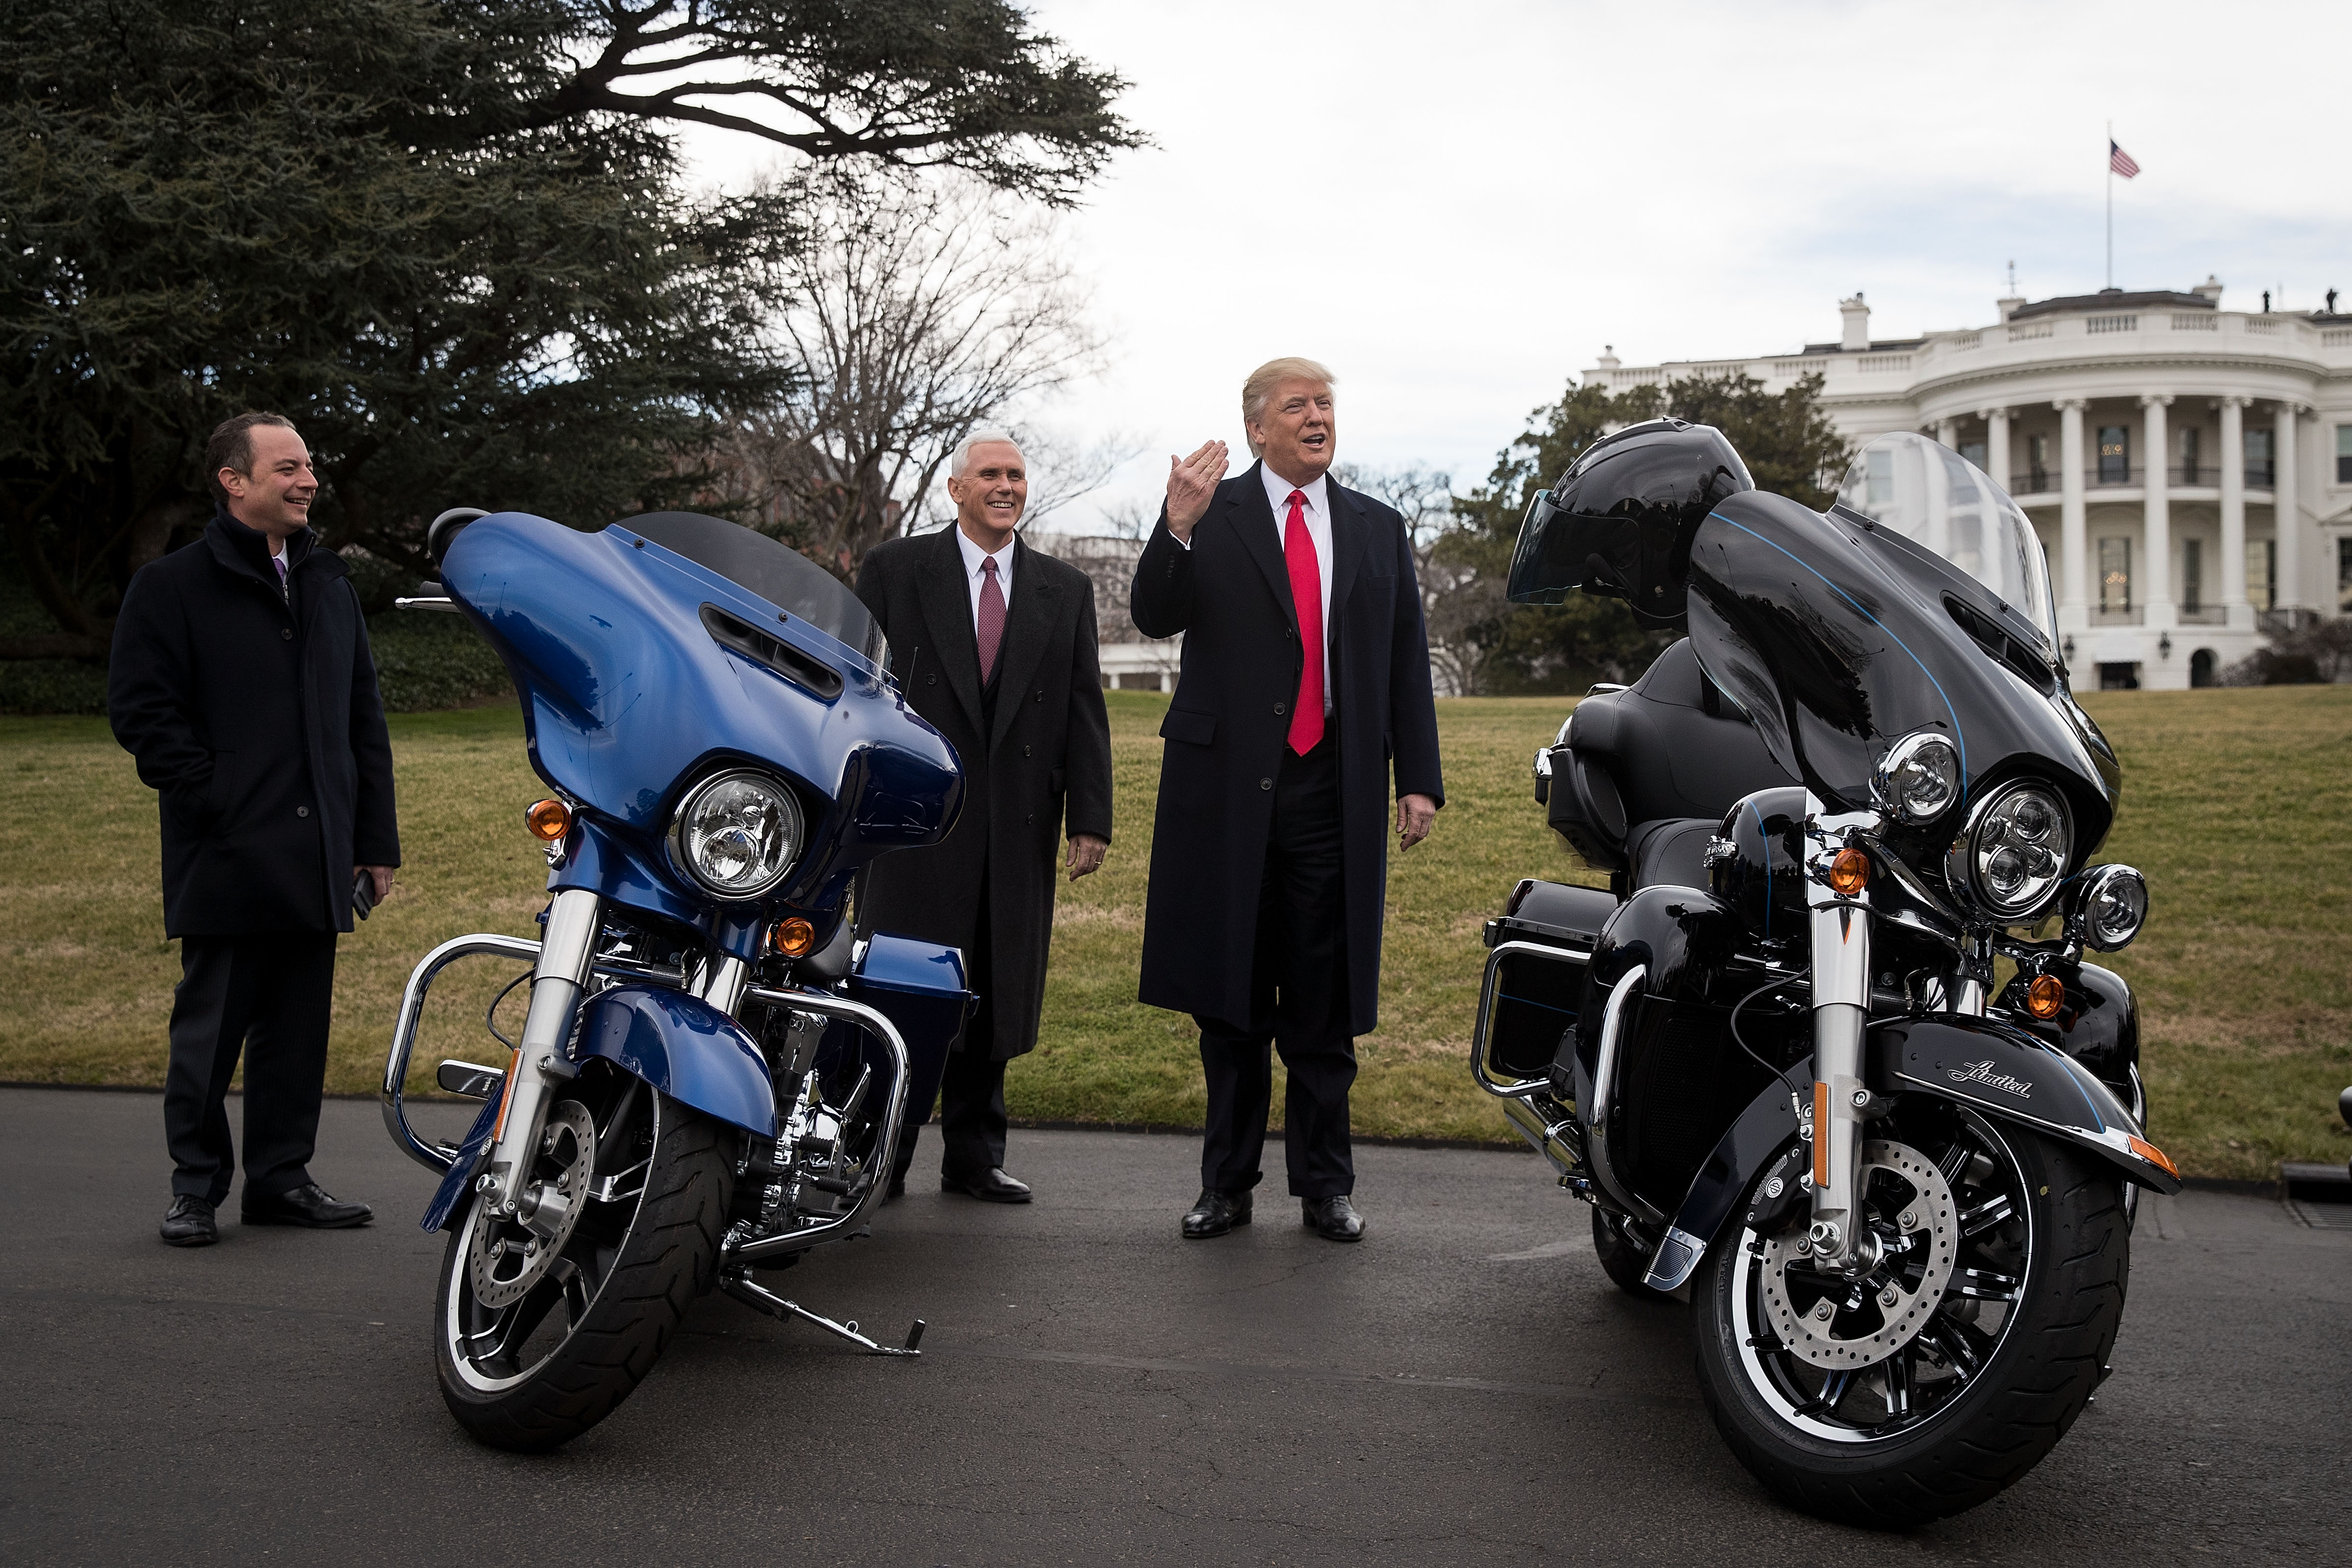 White House Chief of Staff Reince Priebus and Vice President Mike Pence look on as President Donald Trump speaks briefly to reporters after greeting Harley Davidson executives on the South Lawn of the White House, February 2, 2017 in Washington, DC. (Photo by Drew Angerer/Getty Images)